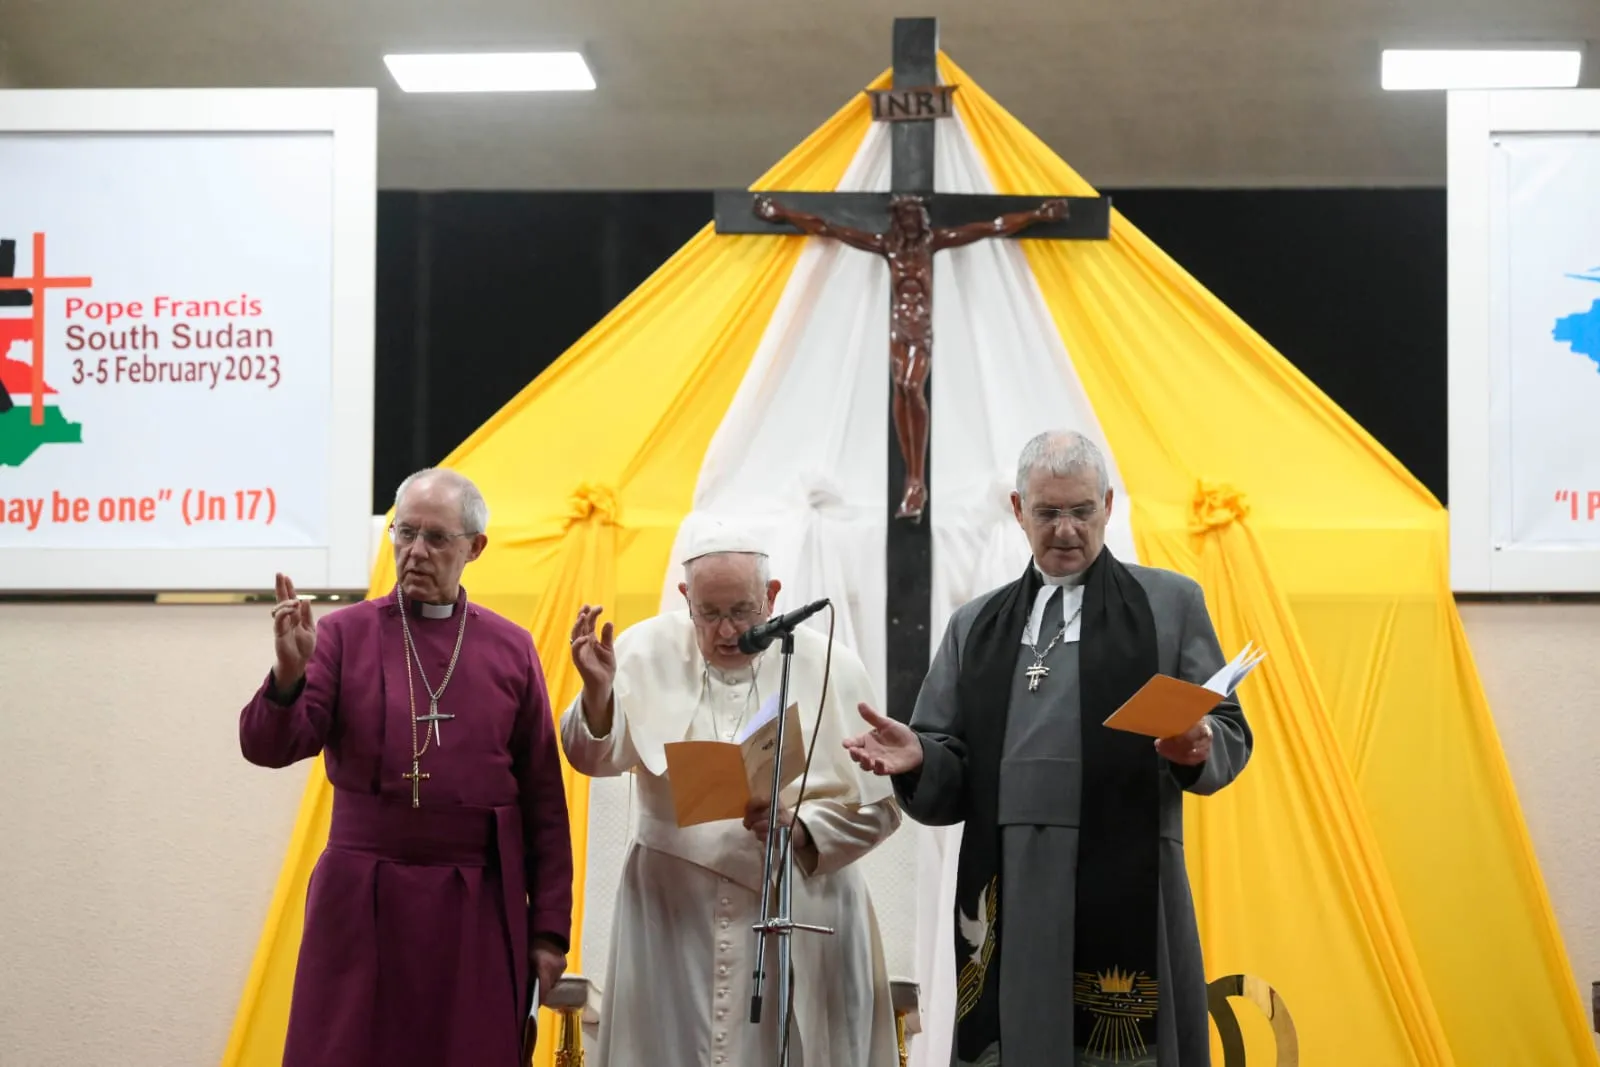 The Archbishop of Canterbury, Justin Welby; Pope Francis; and the Moderator of the Church of Scotland, Iain Greenshields, lead a prayer service for Catholic, Anglican and Presbyterian christians in Juba, Sudan.?w=200&h=150